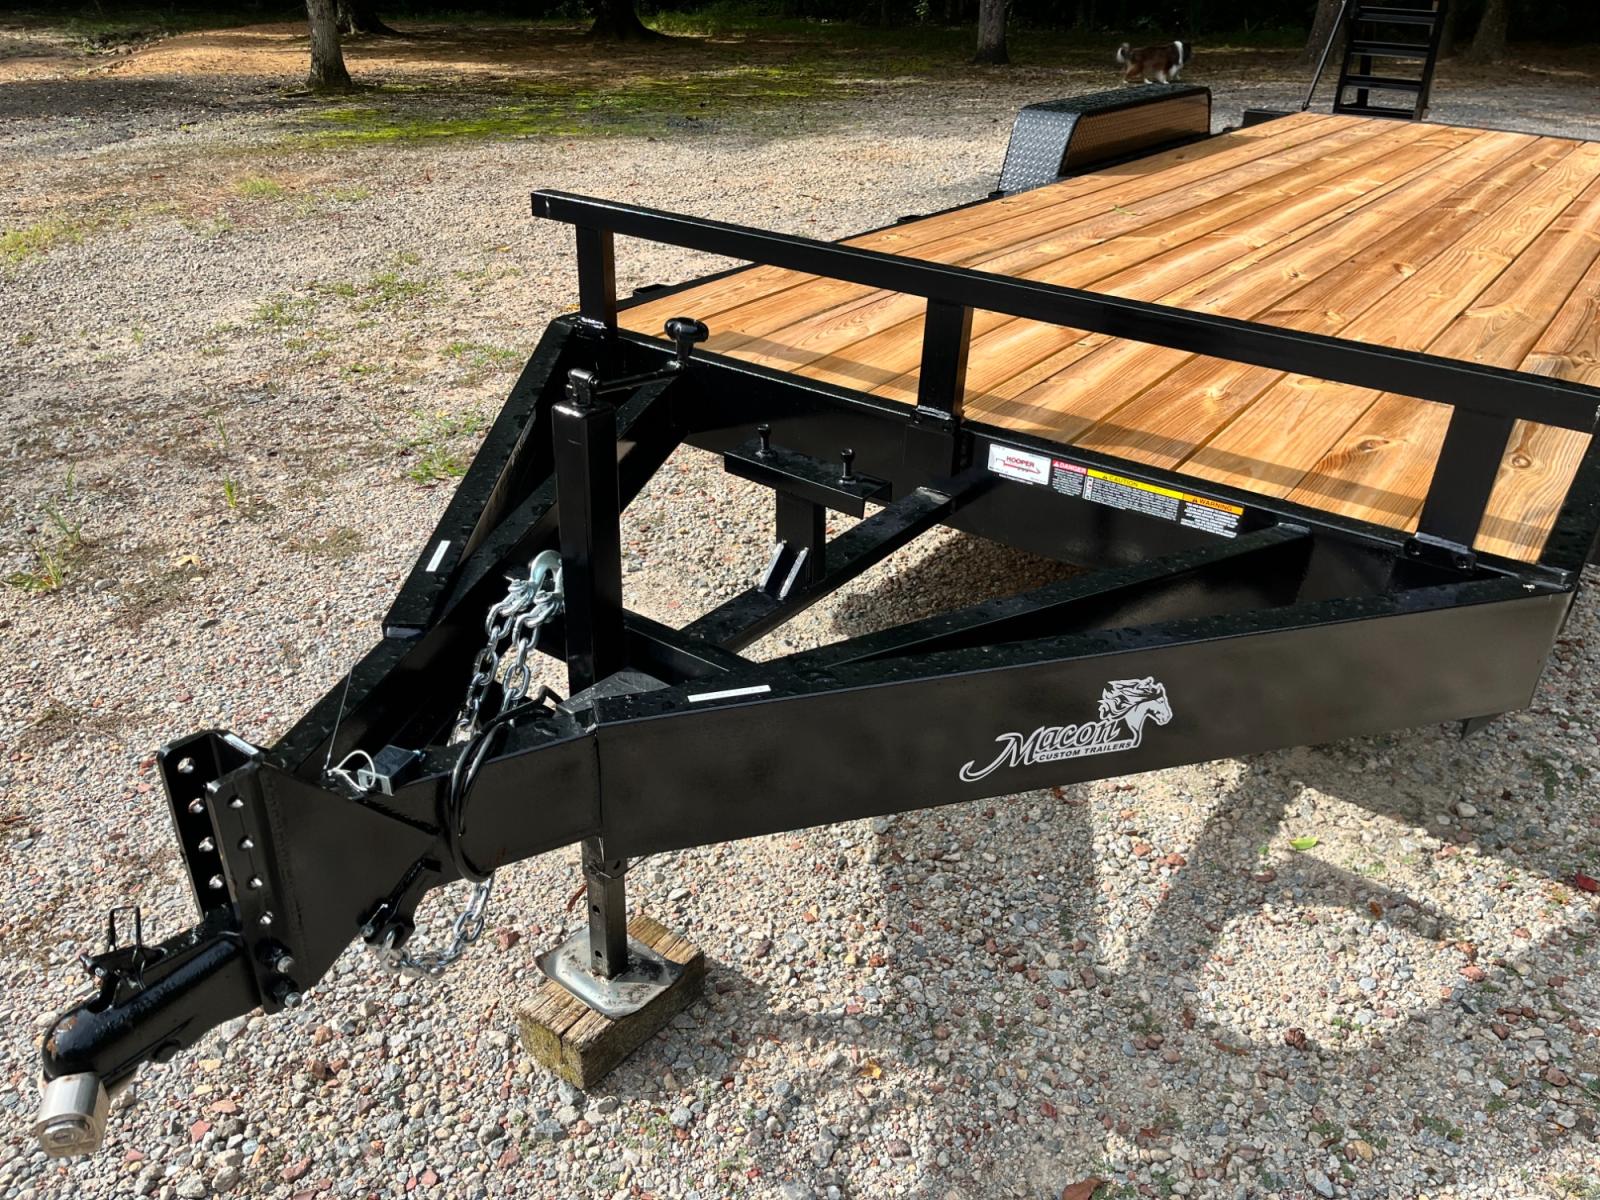 2022 Macon Custom Trailers 7ft X 20ft Flatbed 7 Ton , located at 1330 Rainey Rd., Macon, 31220, (478) 960-1044, 32.845638, -83.778687 - Brand New 2022 Model "Top of the Line" Flatbed BobCat & Equipment Trailer! 7ft X 20ft Including the 24" Beavertail 7k lb Brake Axles! Haul Your Truck, Tractor, BobCat, Mini-Excavator, UTV's, ATV's Etc. Tandem 7,000lb Dexter Axles, Electric Brakes on Both Axles too! 235/80X16" Radials 8" Channel - Photo #2